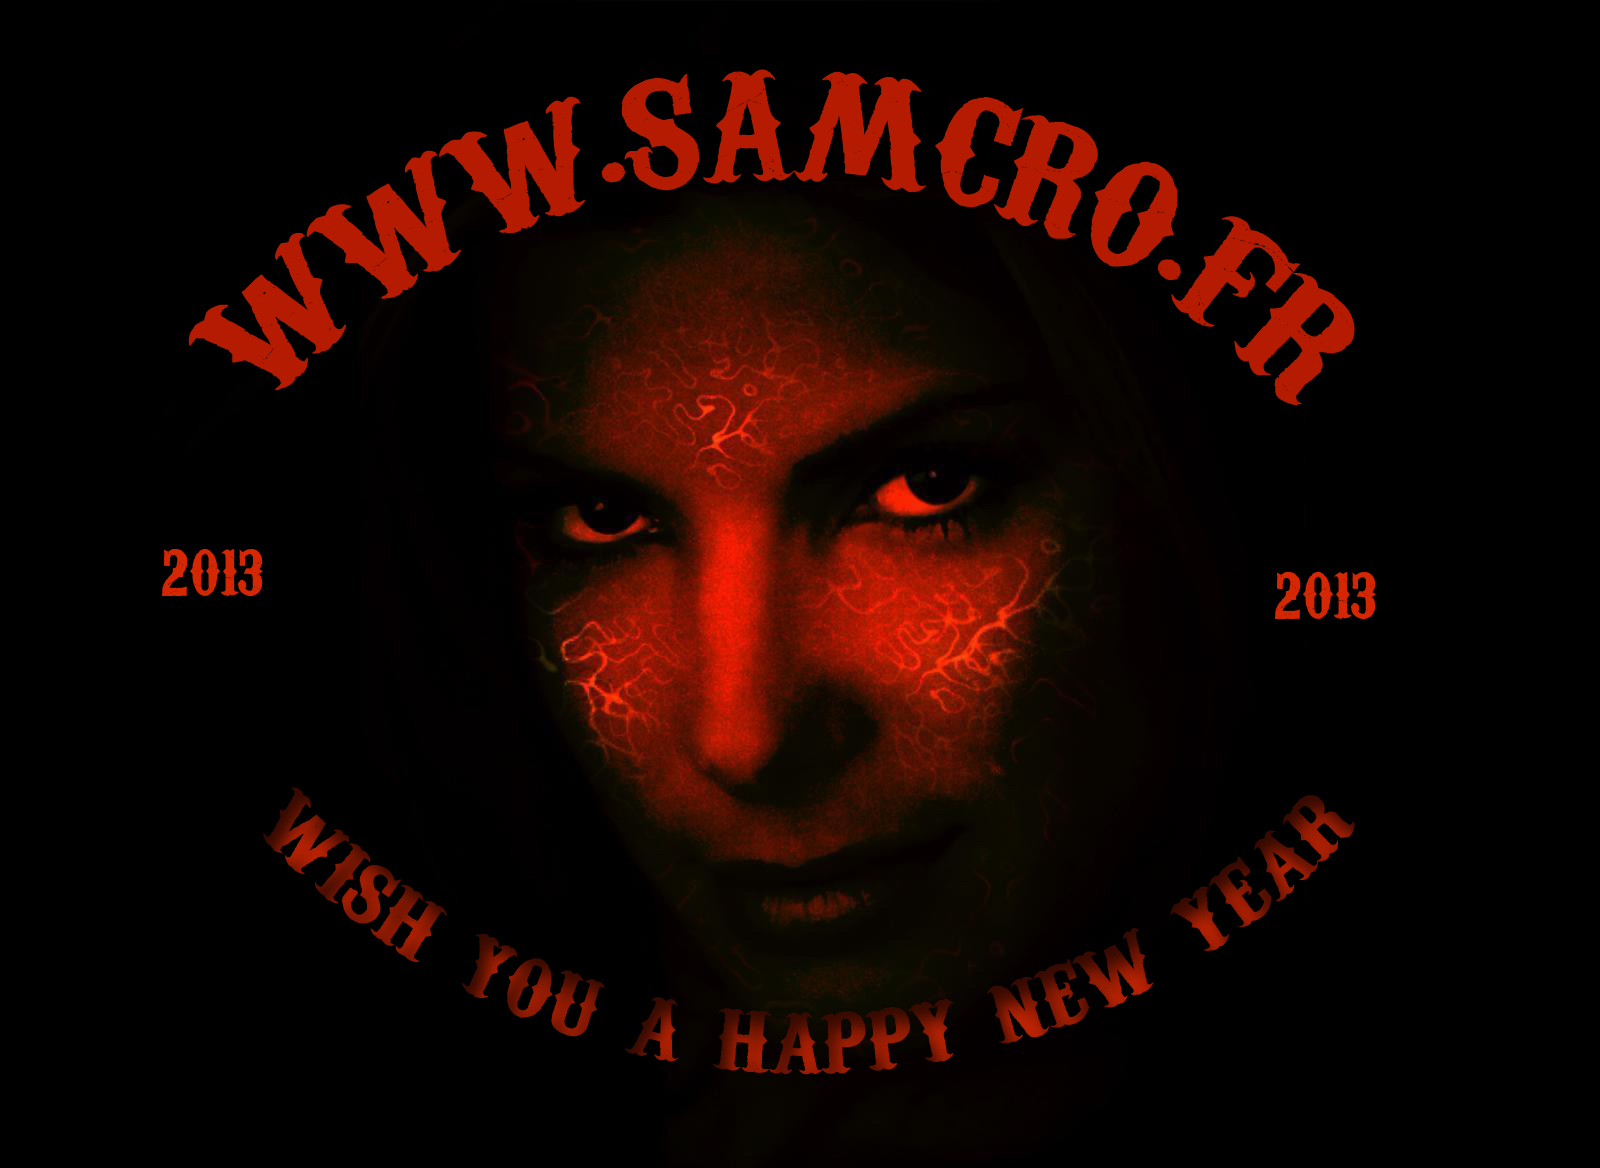 samcro.fr wish you a happy new year